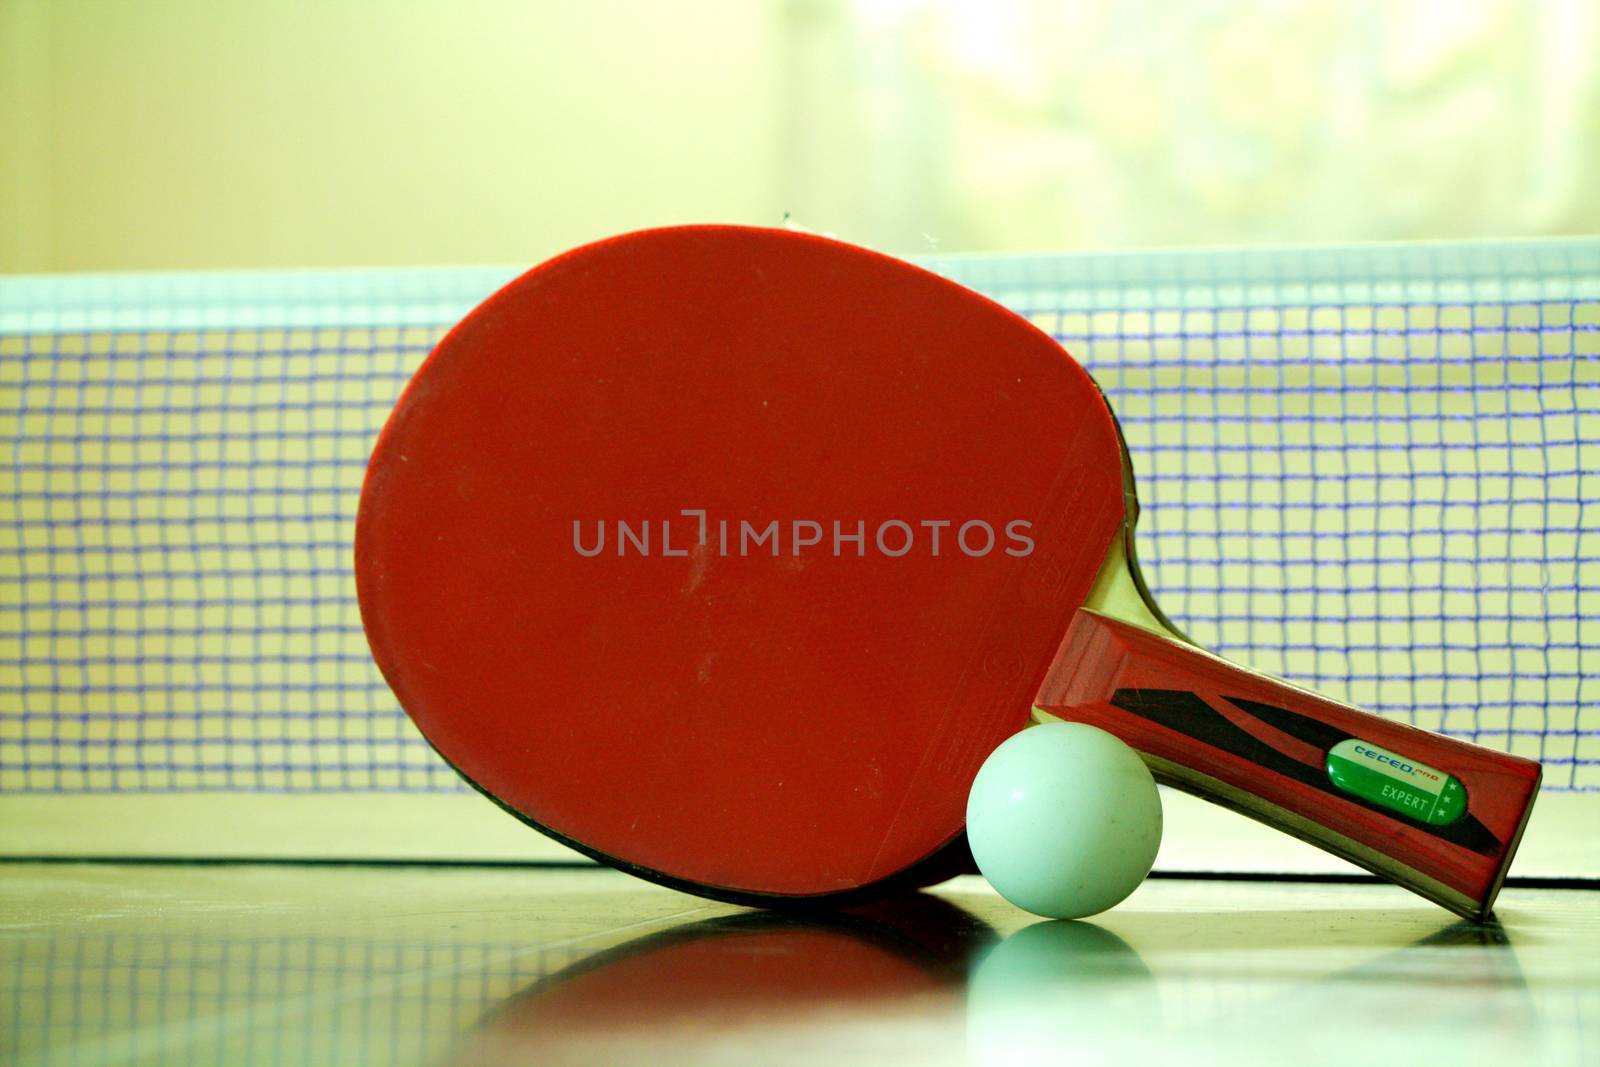 Two red table tennis or ping pong rackets and ball on a green table with blue net